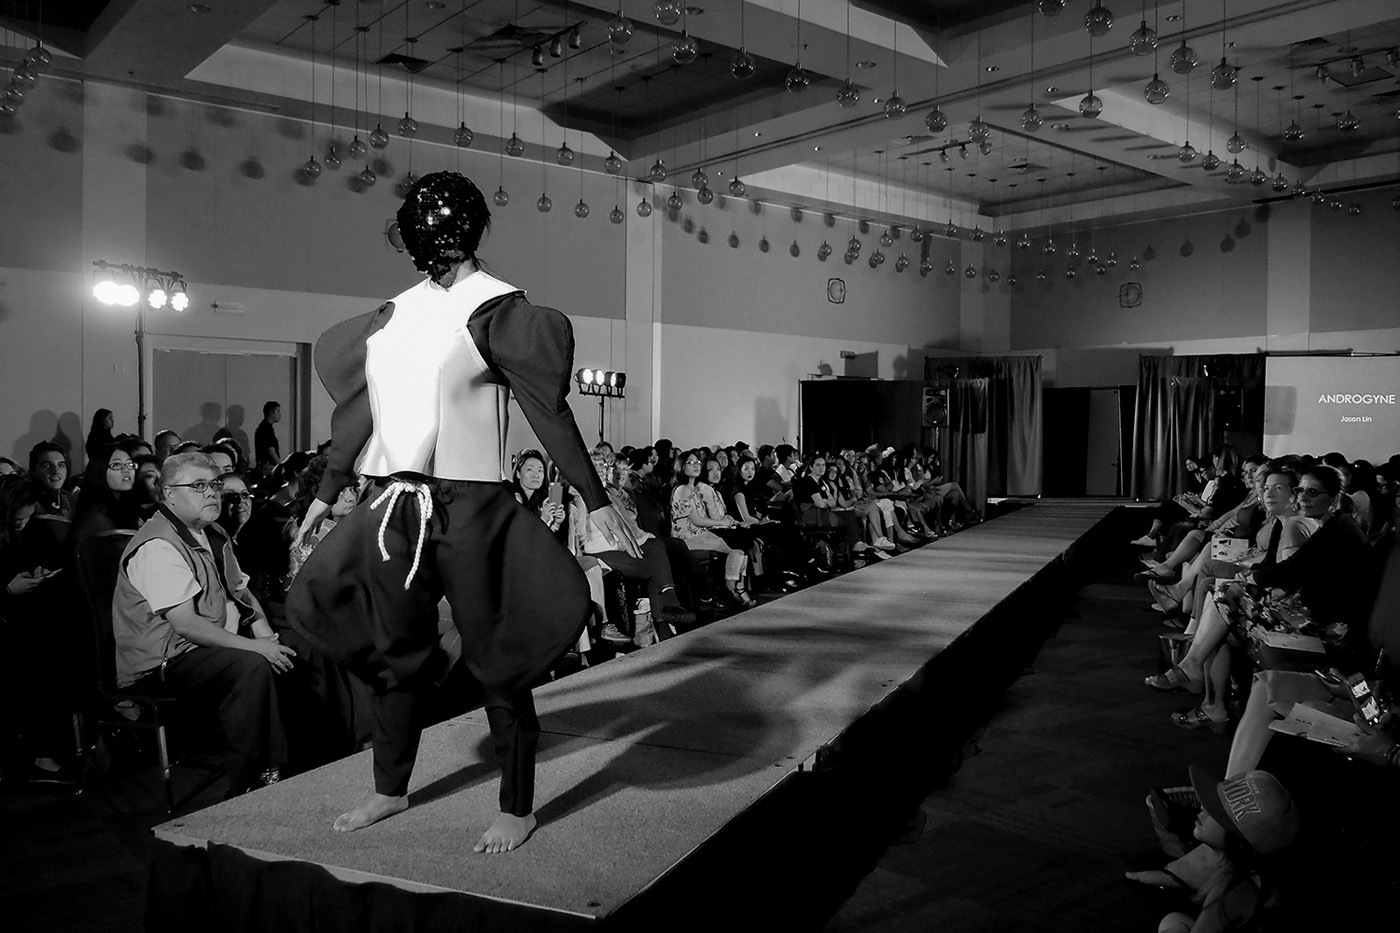 A black and white image of a figure at the end of a fashion runway with an audience of people on either side of it. The model's face is obscured by a sequin covered mask and a wears a black and white outfit that exaggerates the bicep and thigh muscle areas of the model.